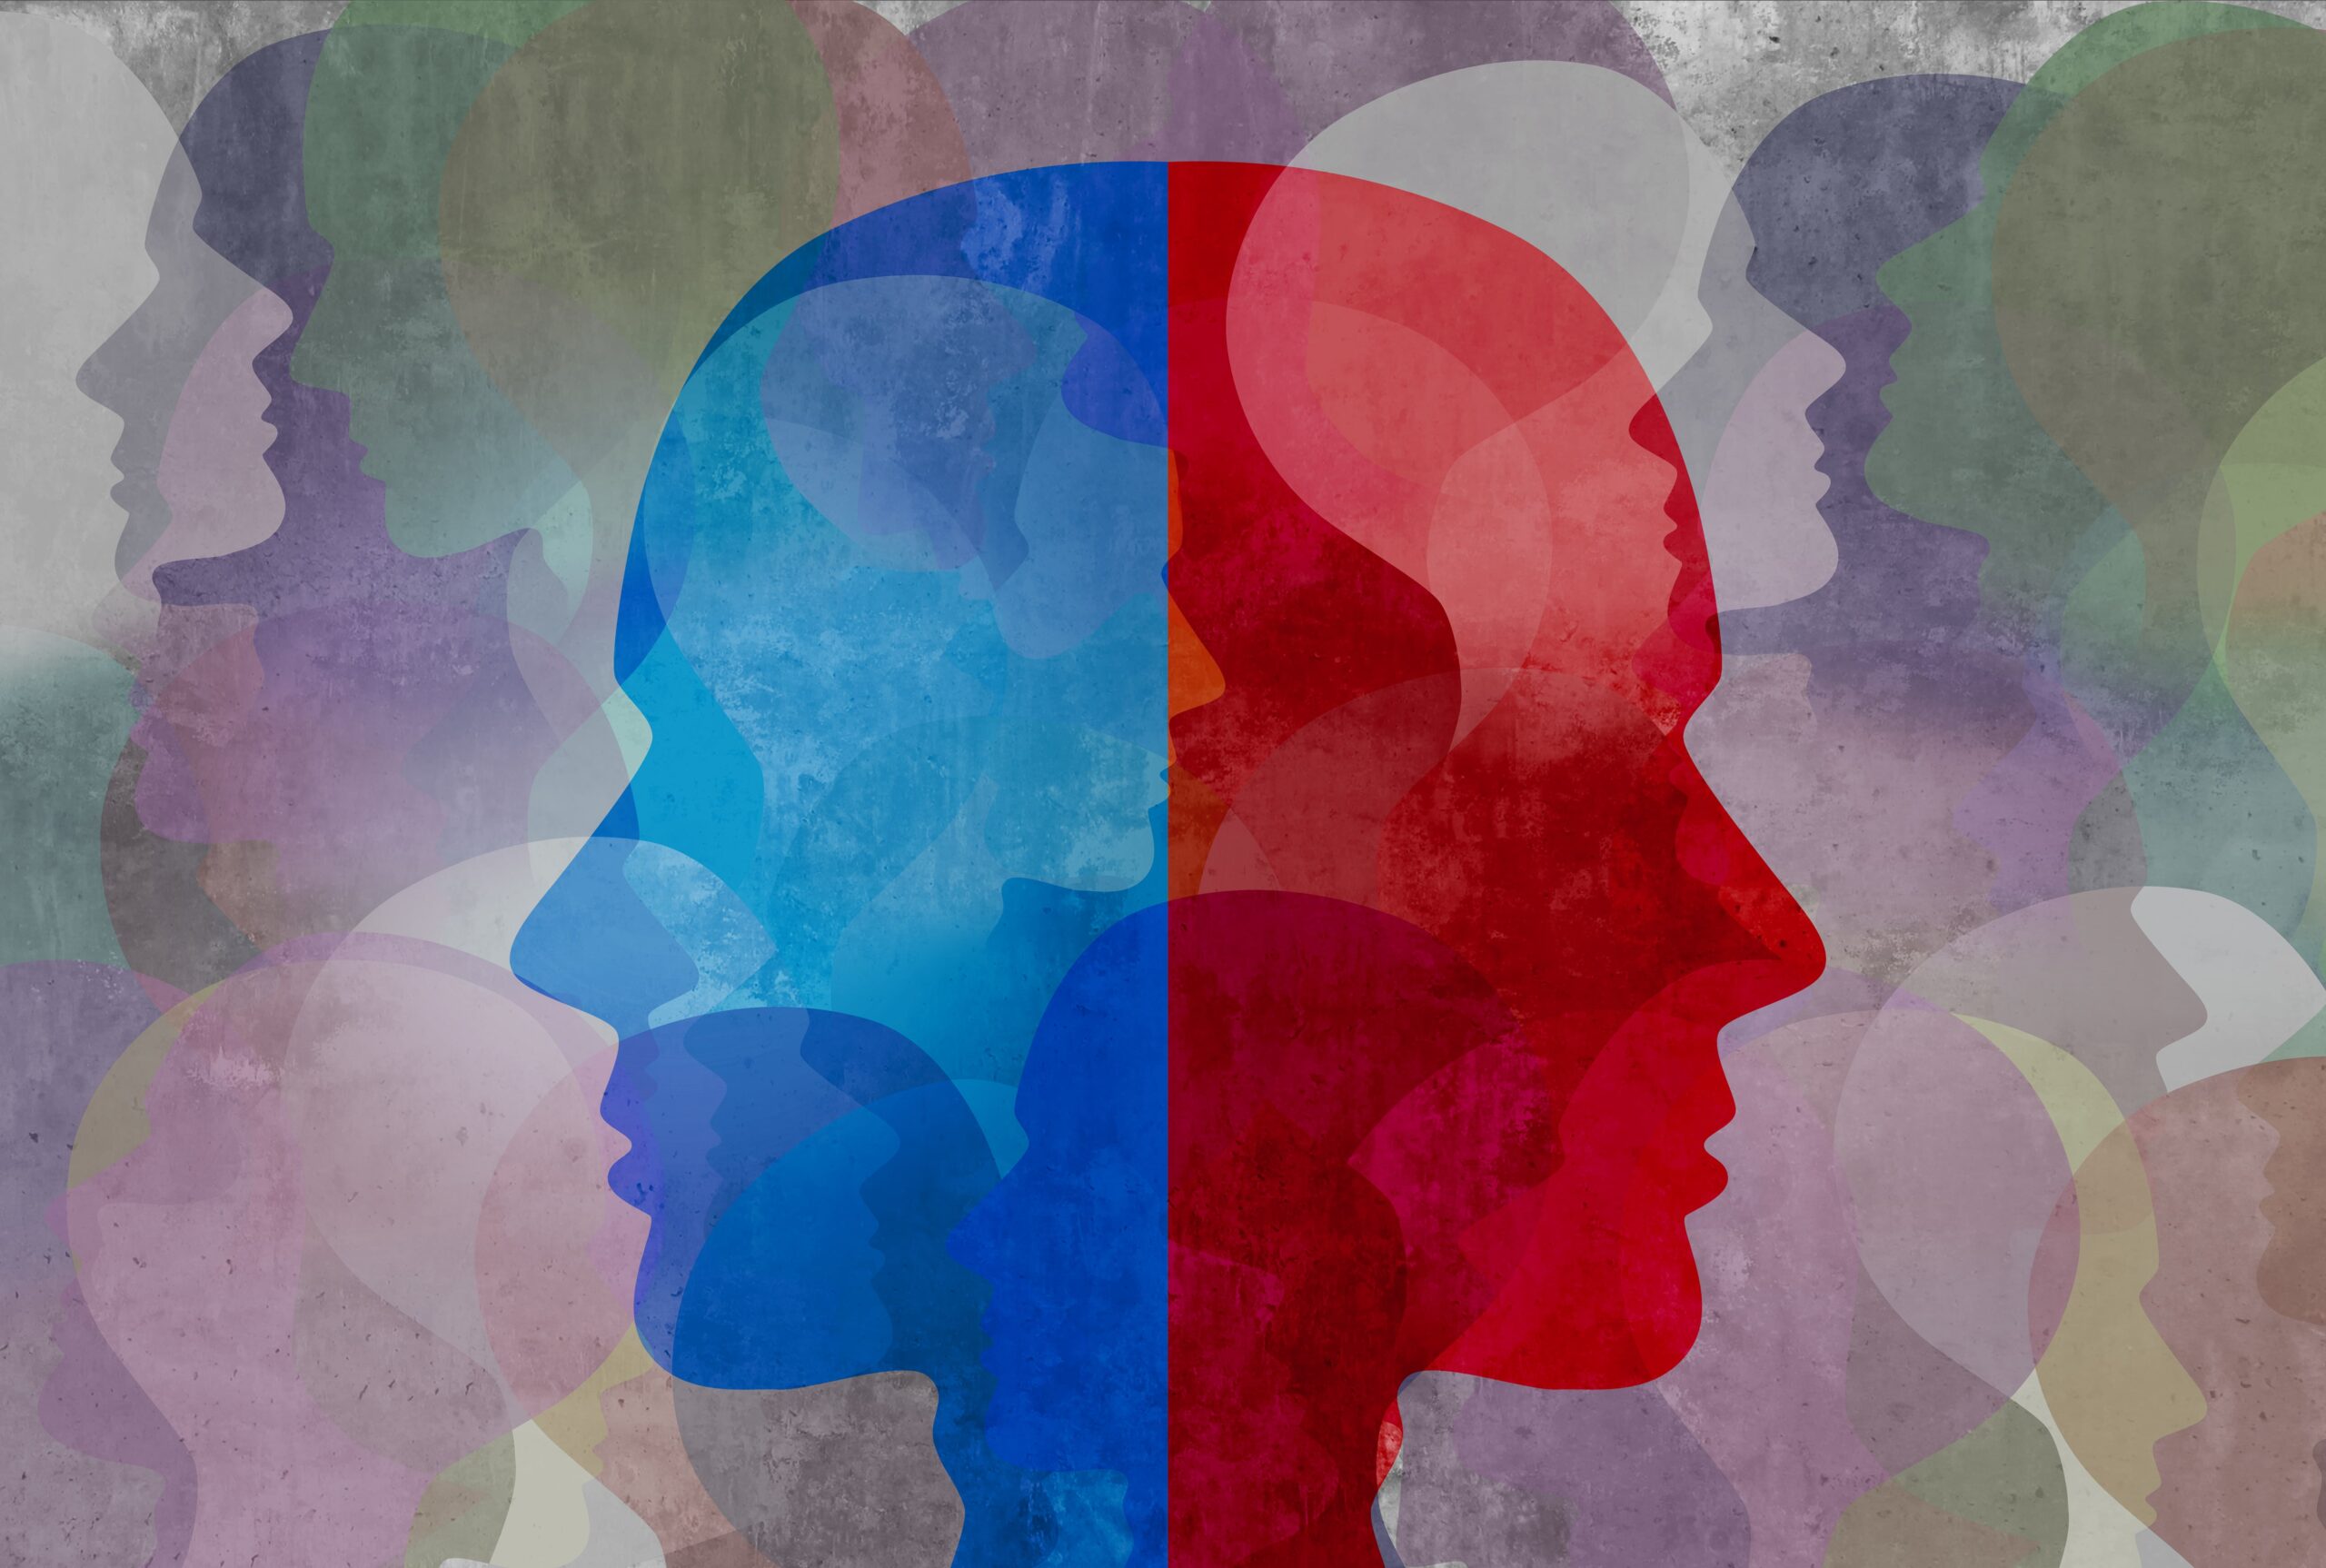 graphic illustration, two faces facing opposite directions, more faces in background, multi-colored